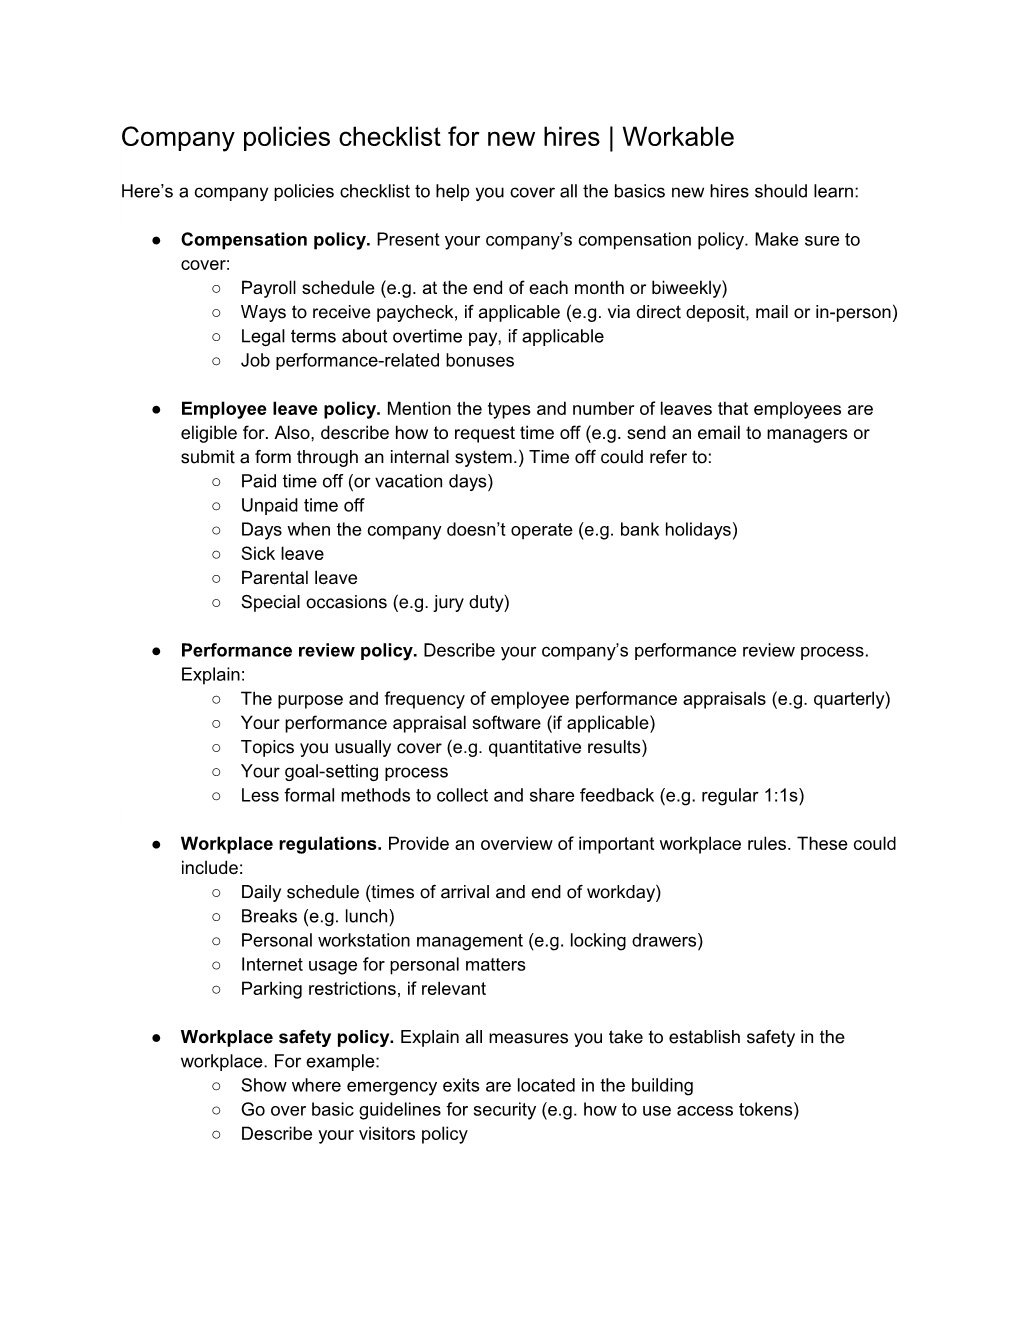 Company Policies Checklist for New Hires Workable